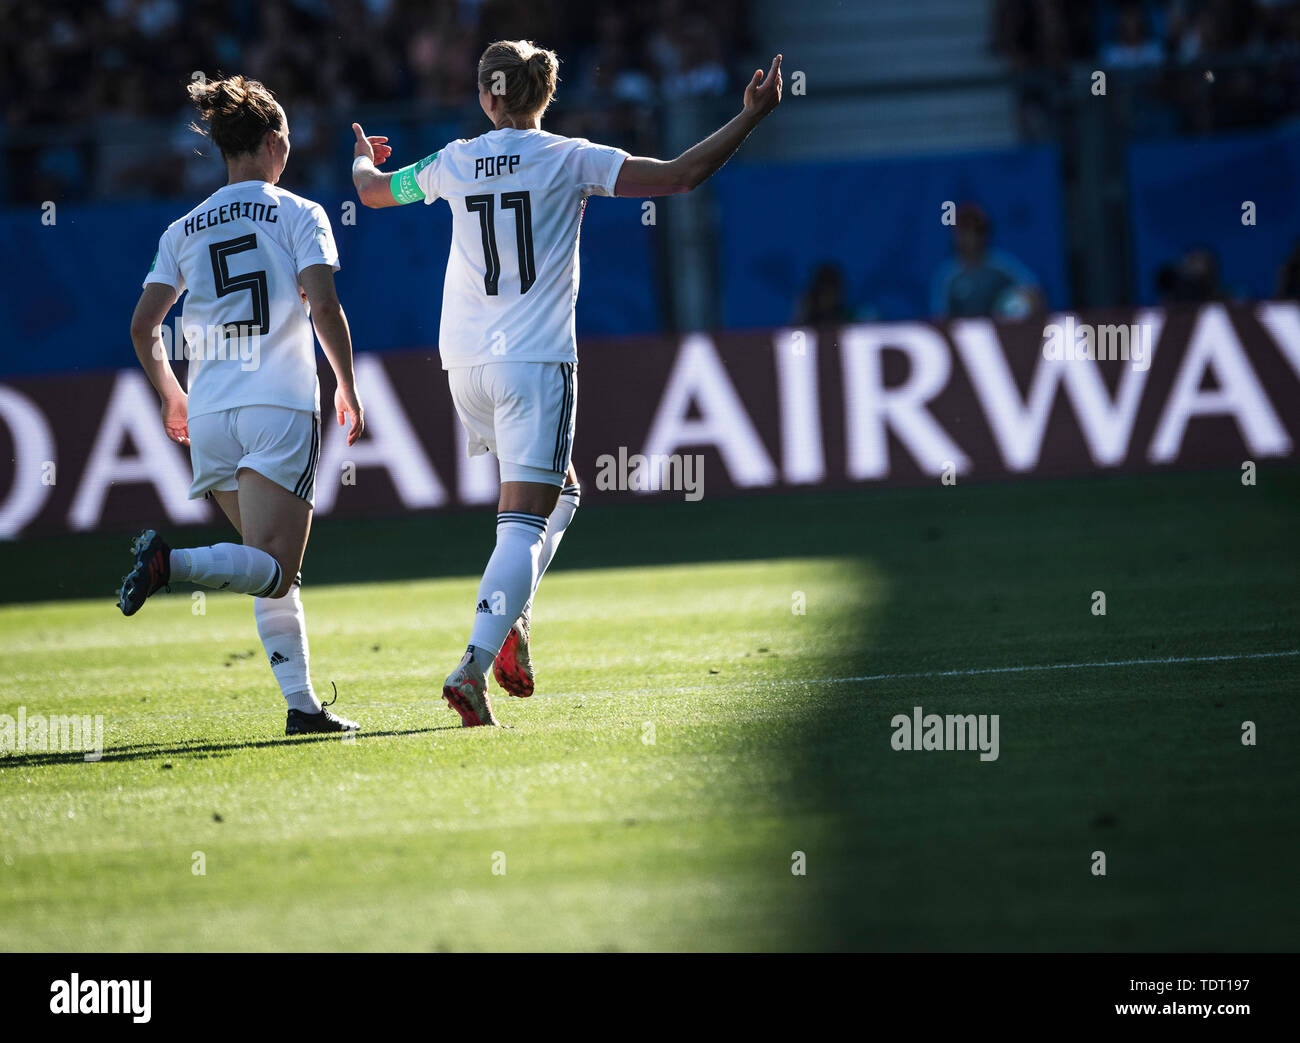 Montpellier. 17th June, 2019. Alexandra Popp (R) of Germany celebrates with Marina Hegering during the group B match between Germany and South Africa at the 2019 FIFA Women's World Cup in Montpellier, France on June 17, 2019. Credit: Xiao Yijiu/Xinhua/Alamy Live News Stock Photo